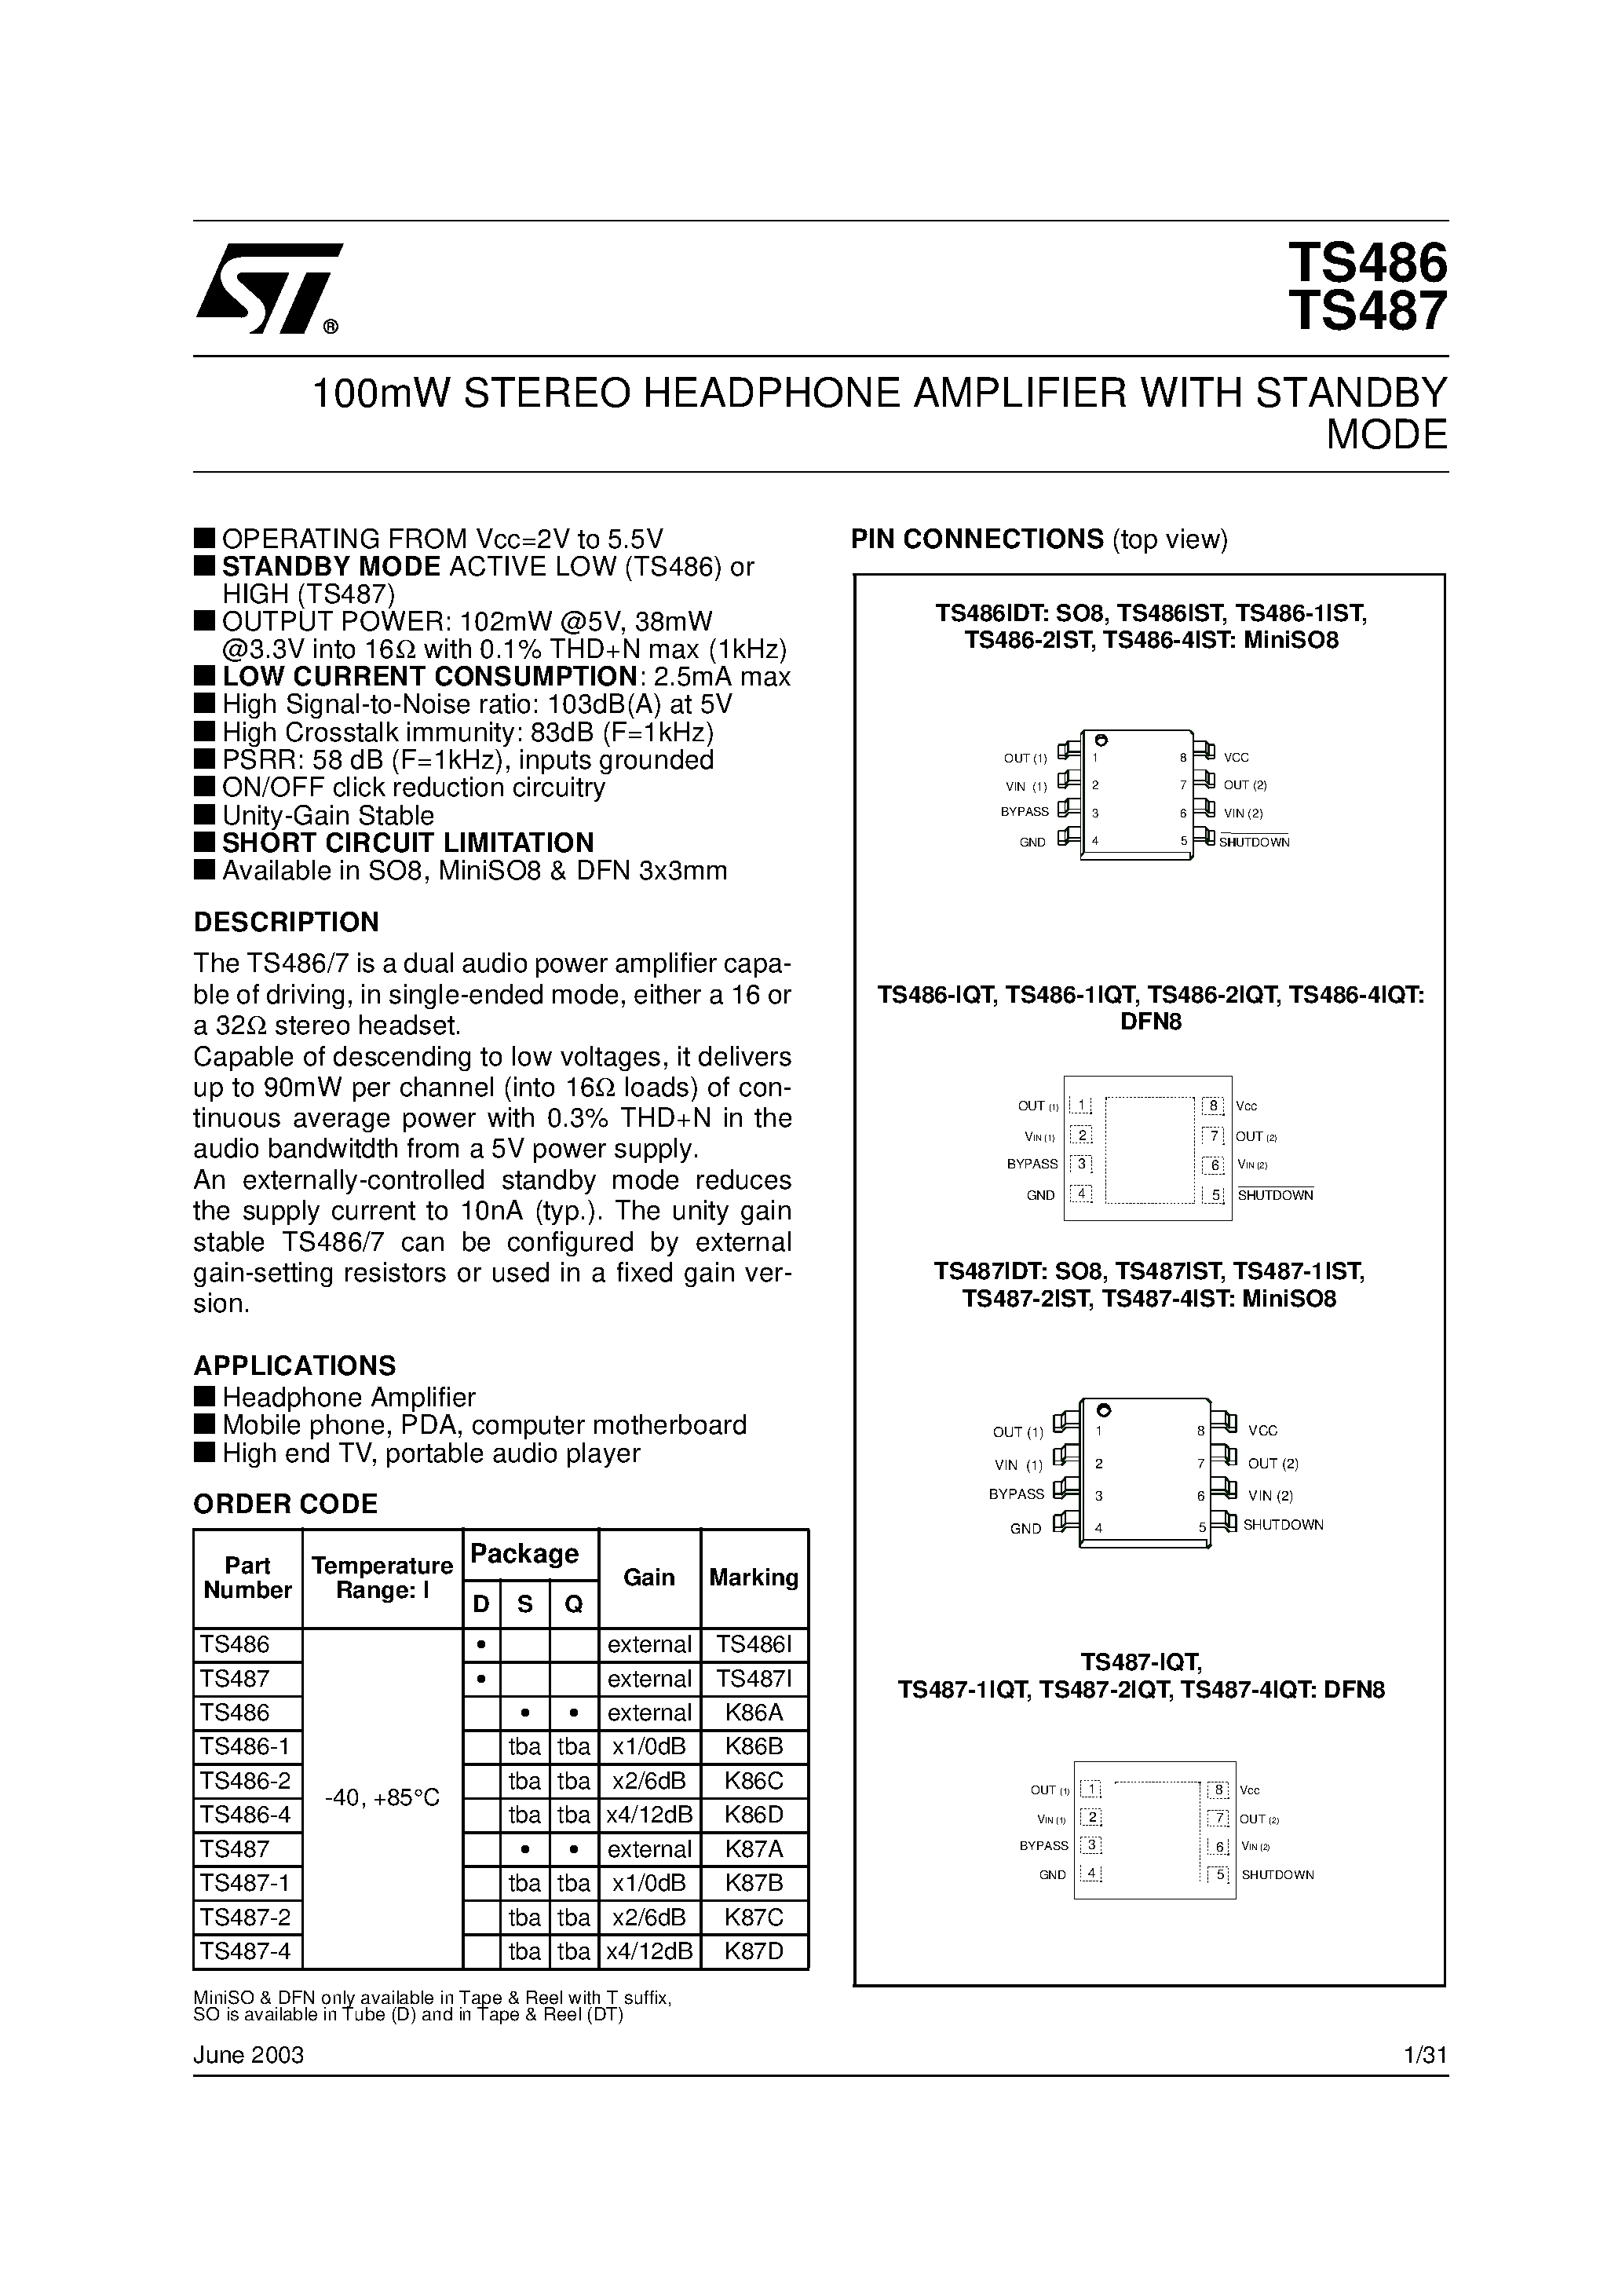 Datasheet TS487-4 - 100mW STEREO HEADPHONE AMPLIFIER WITH STANDBY MODE page 1